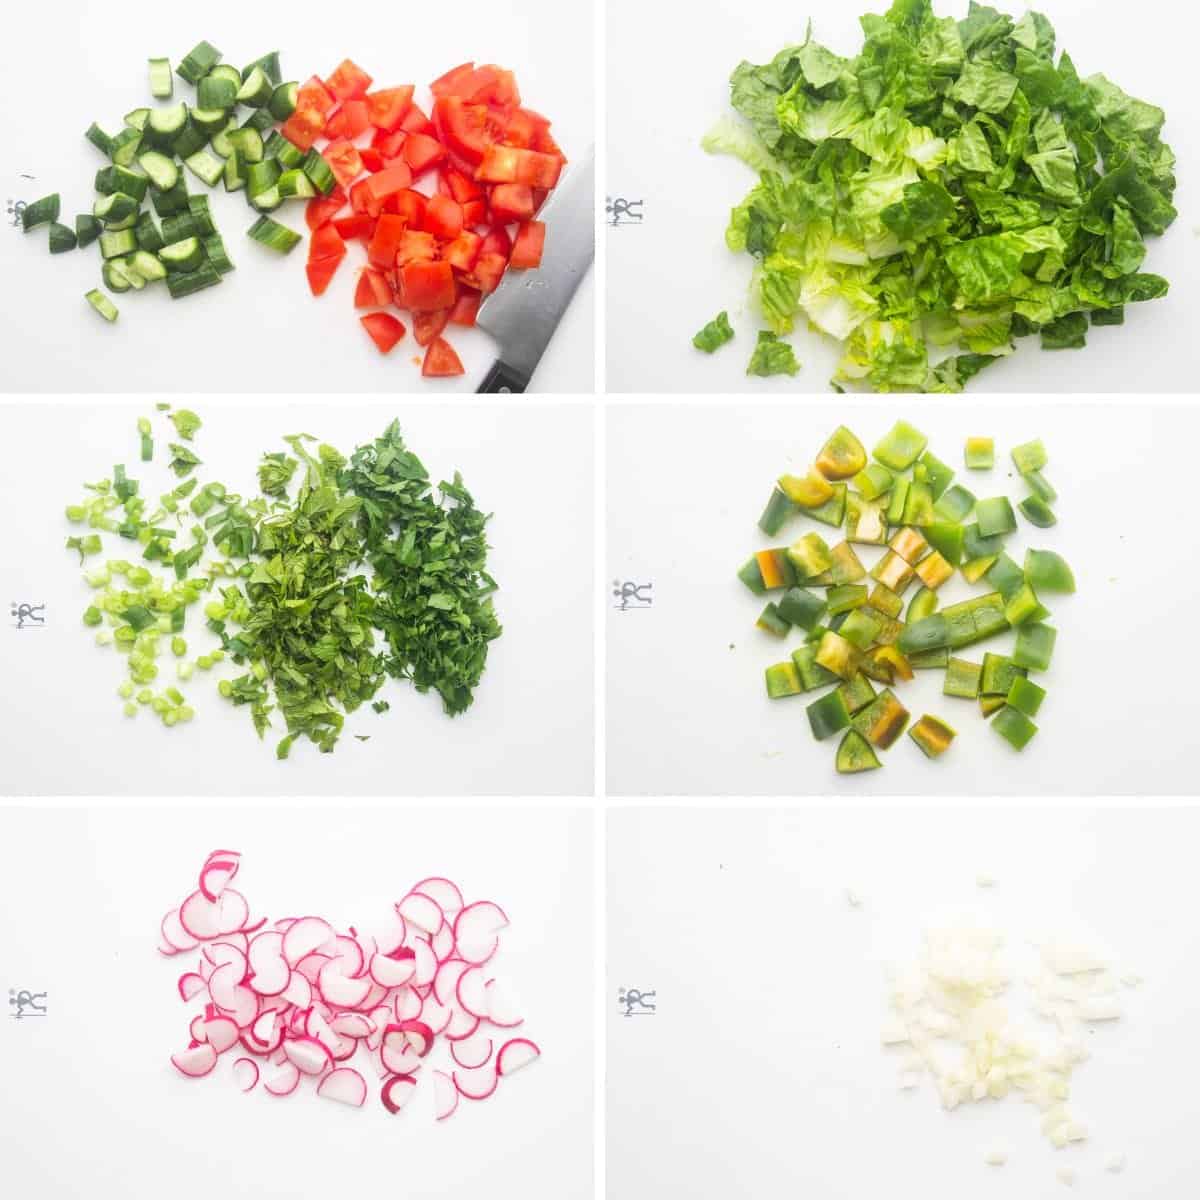 a collage of images showing how to cut vegetables for fattoush salad.